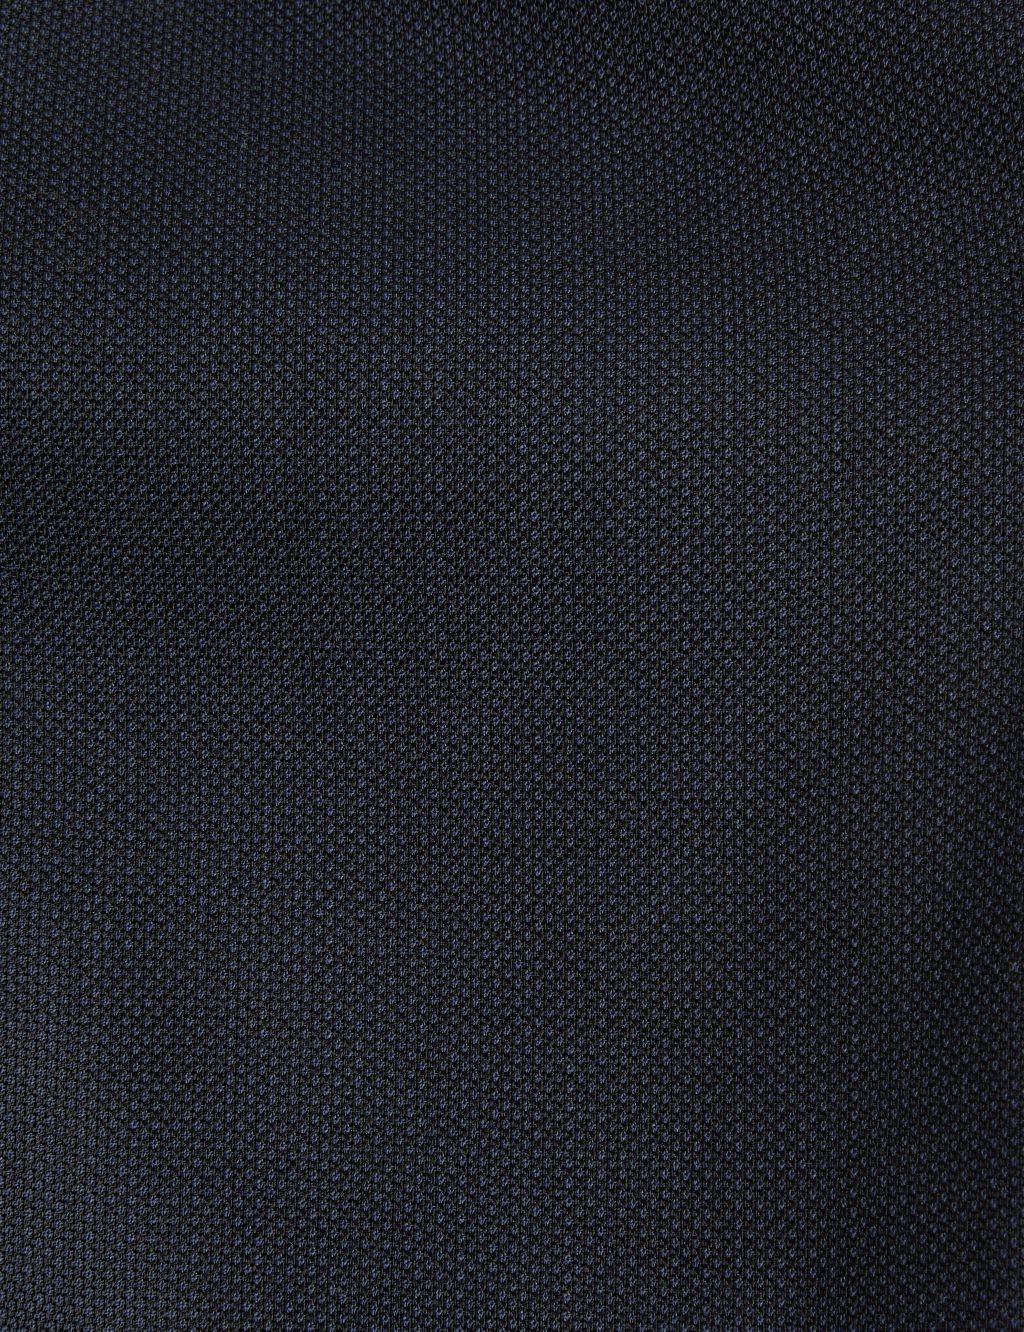 Tailored Fit Pure Wool Birdseye Trousers image 7